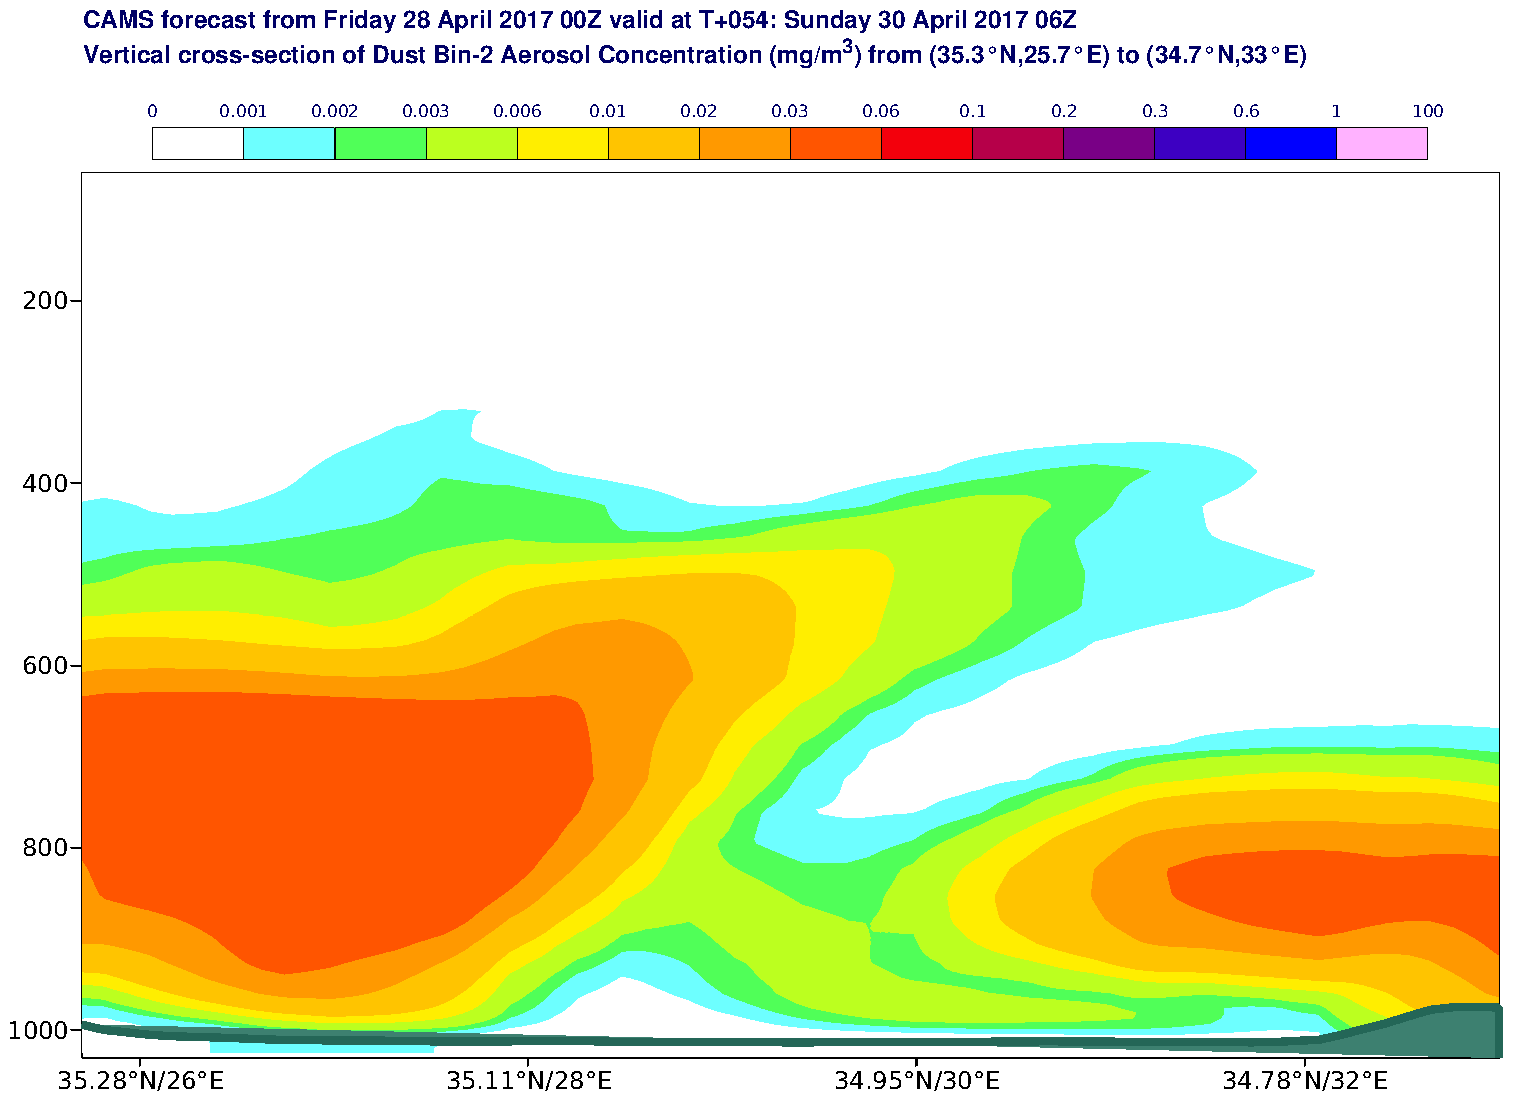 Vertical cross-section of Dust Bin-2 Aerosol Concentration (mg/m3) valid at T54 - 2017-04-30 06:00